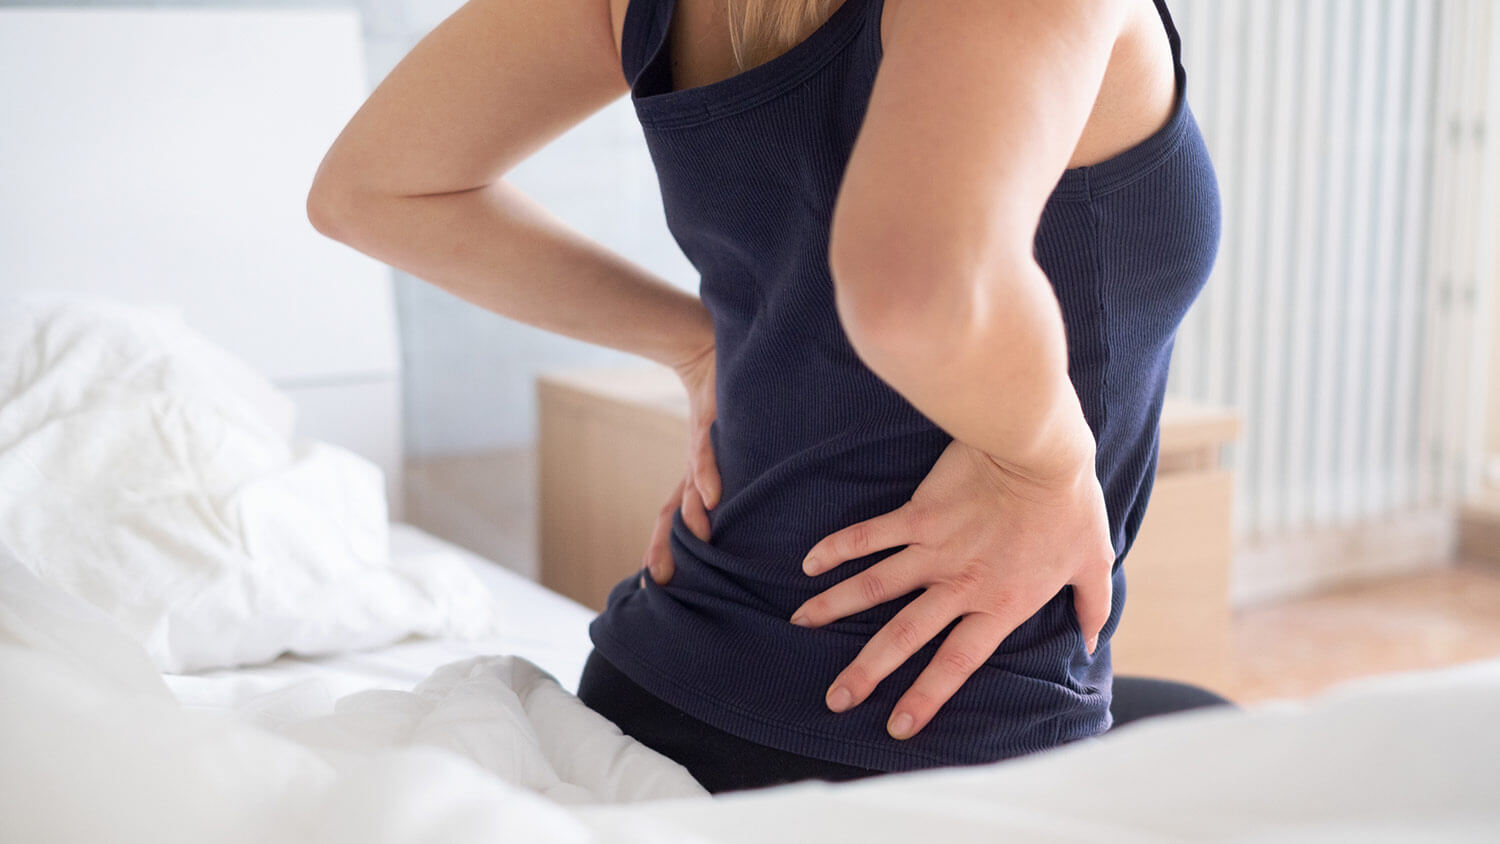 Top Tips on Hip Pain Relief Sleeping. Learn How